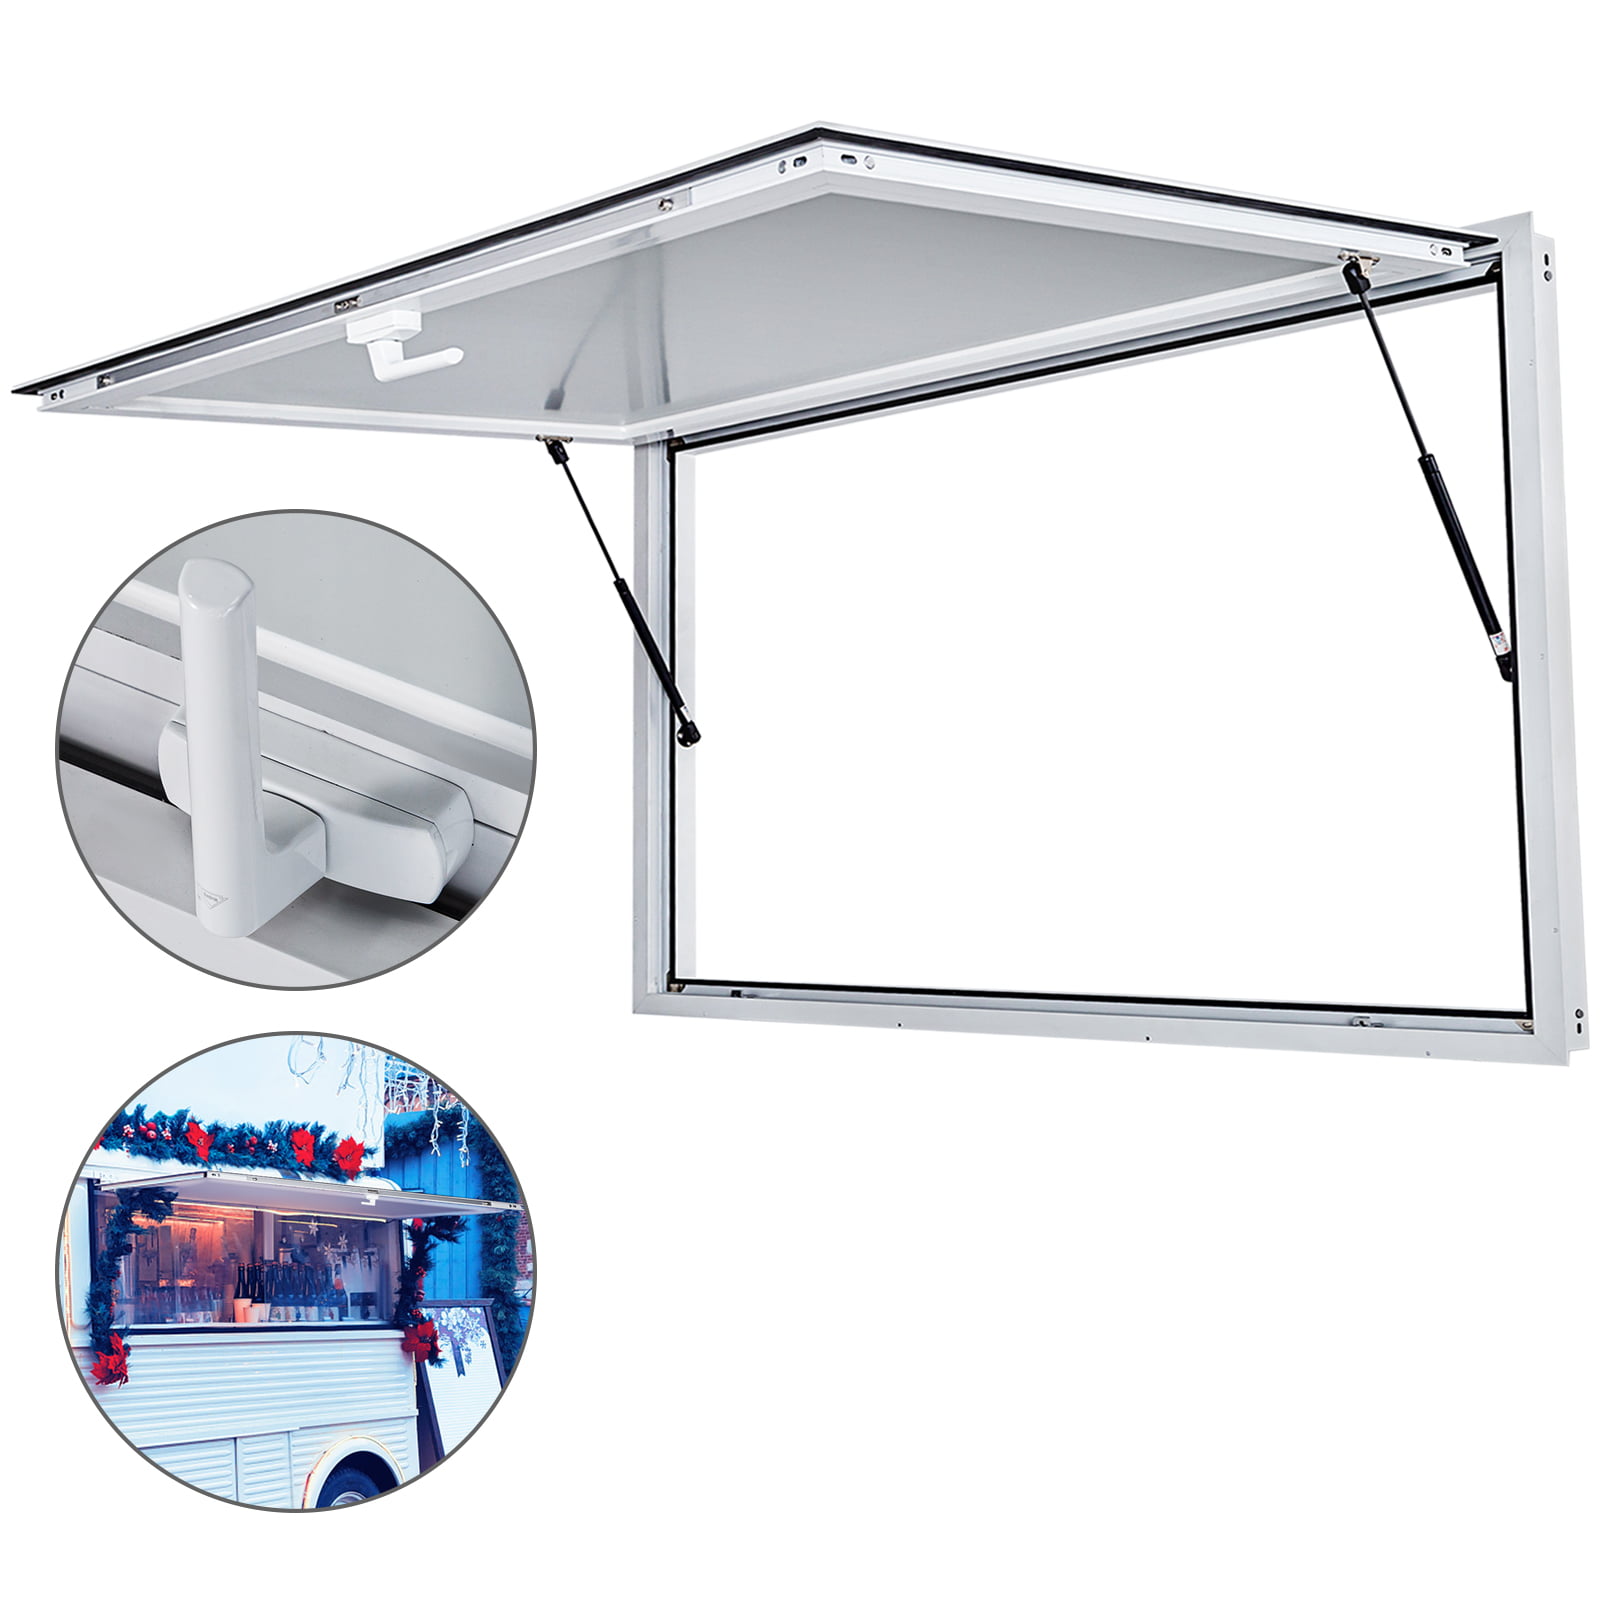 Concession Stand Trailer Serving Window w/ Awning Cover 2 Window53" x 33"